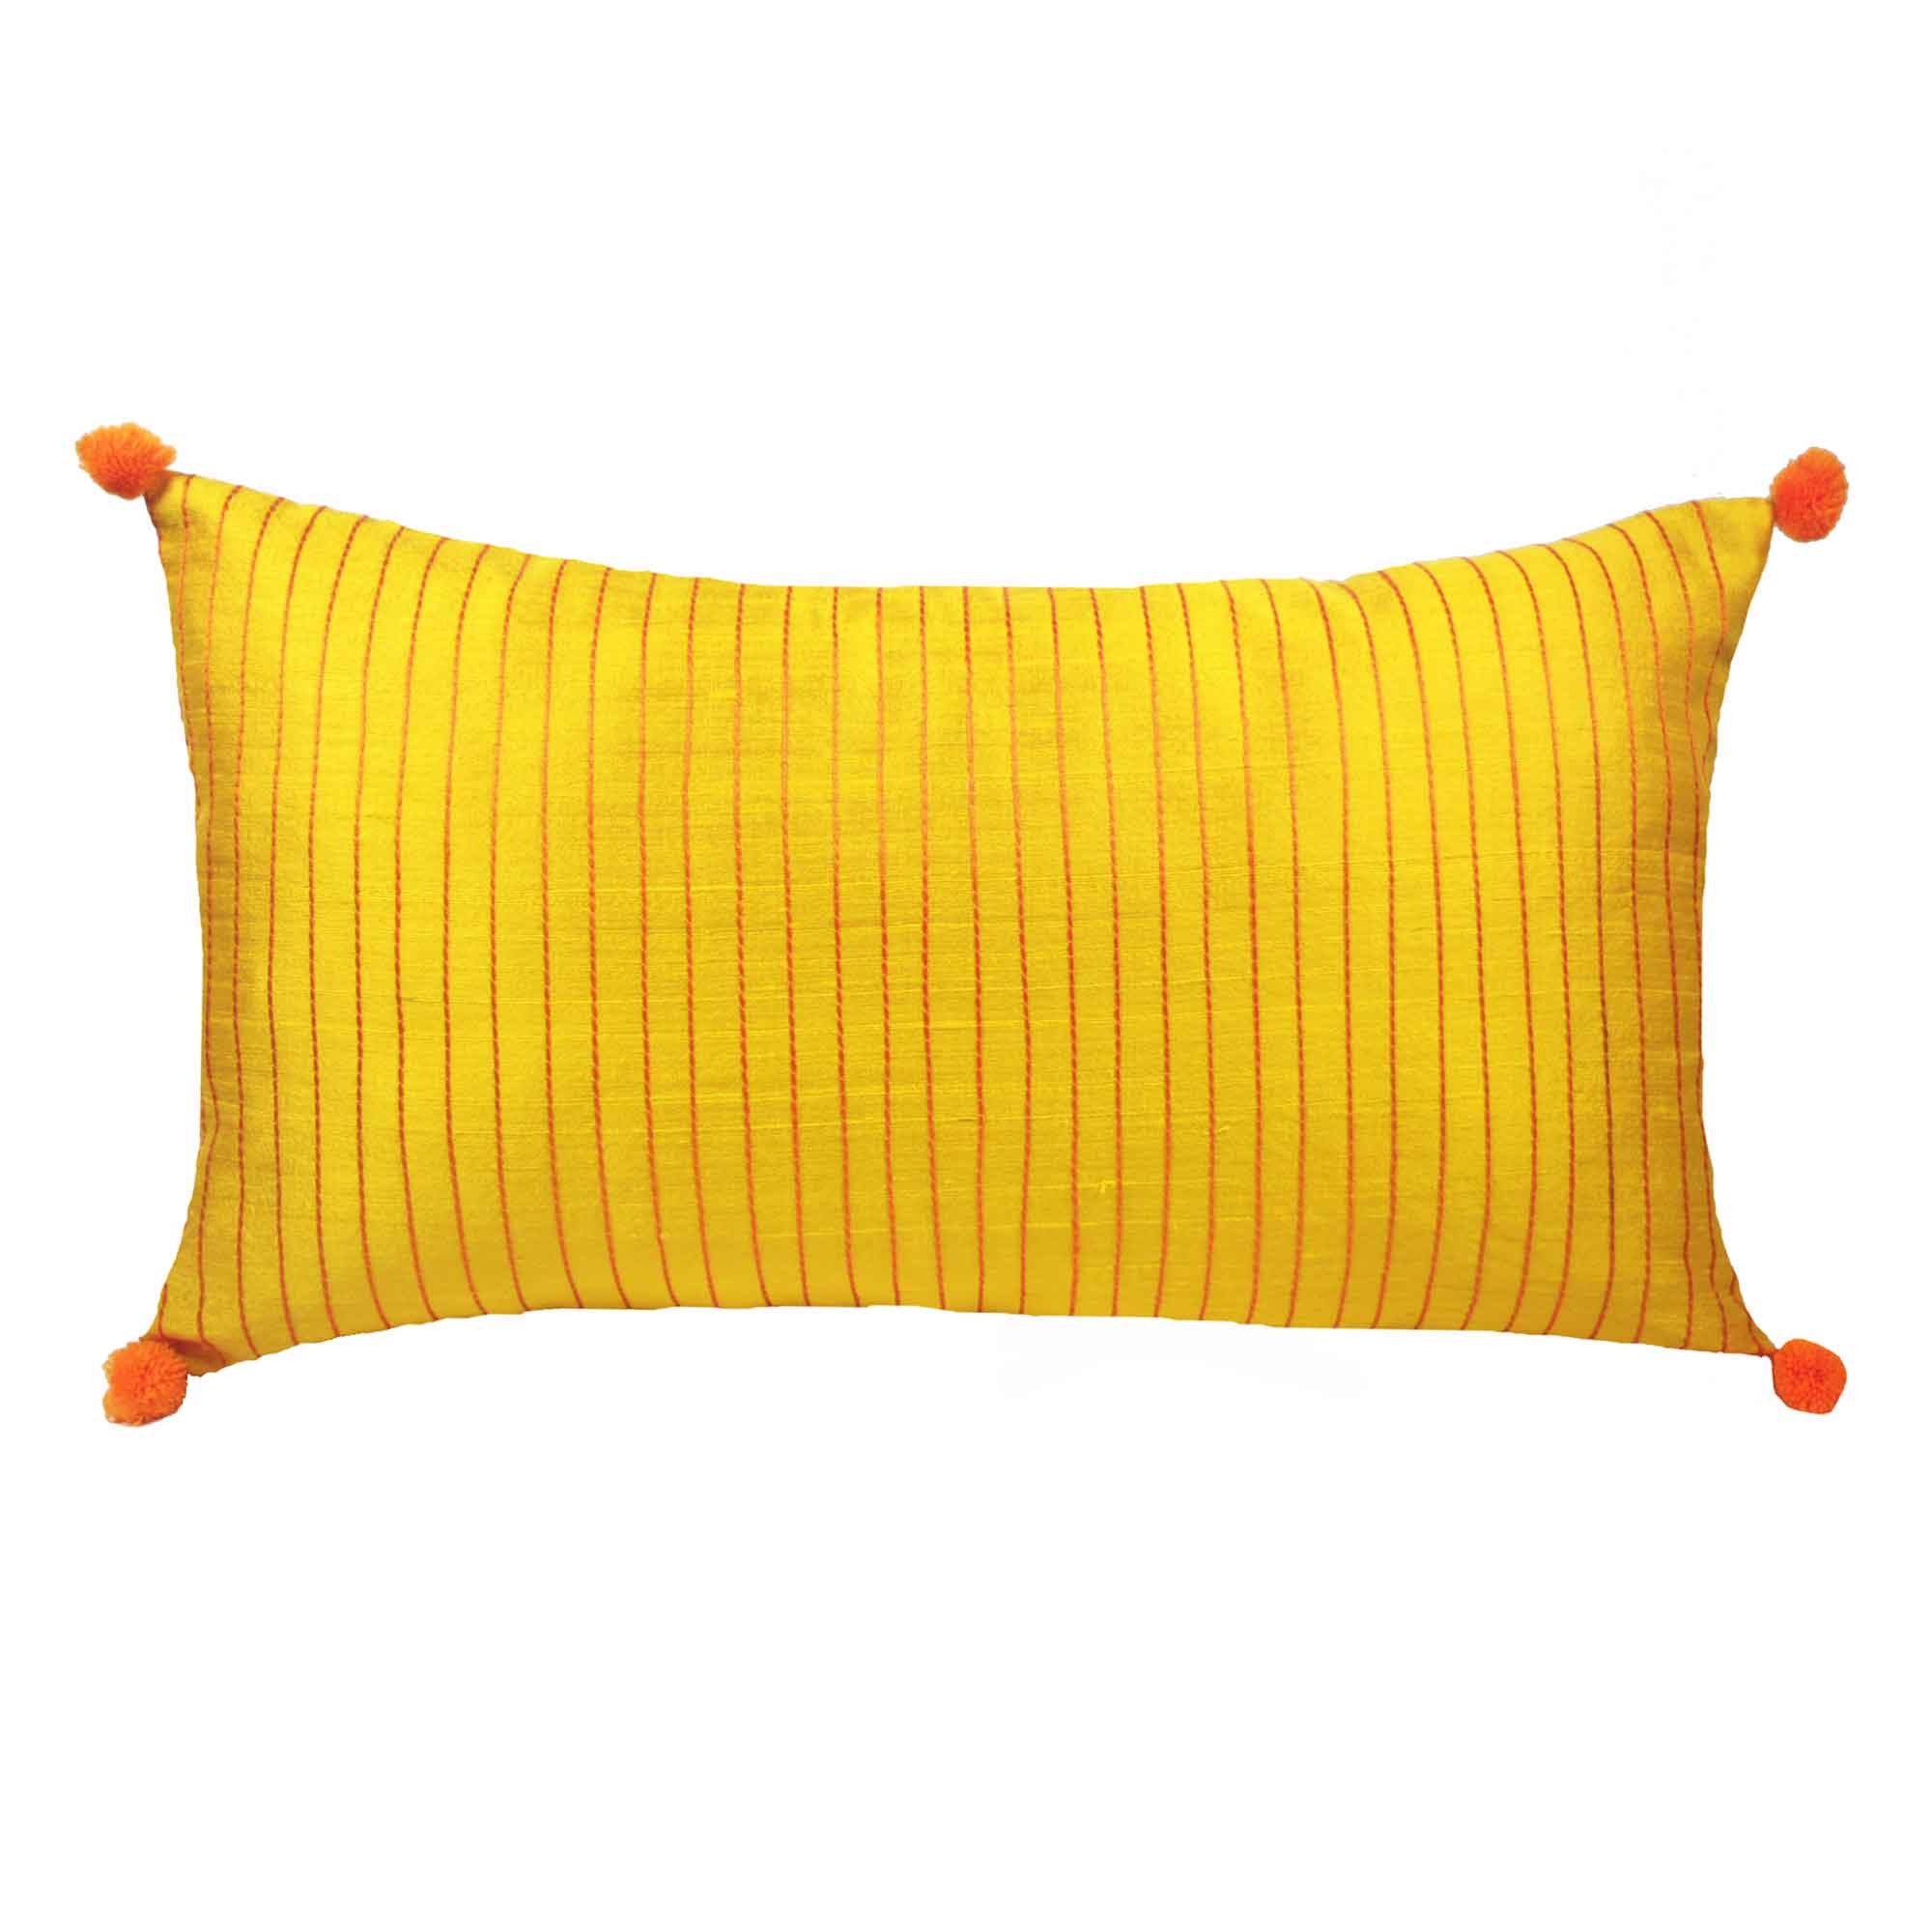 Yellow Orange Kantha Embroidery Pillow Buy from DesiCrafts